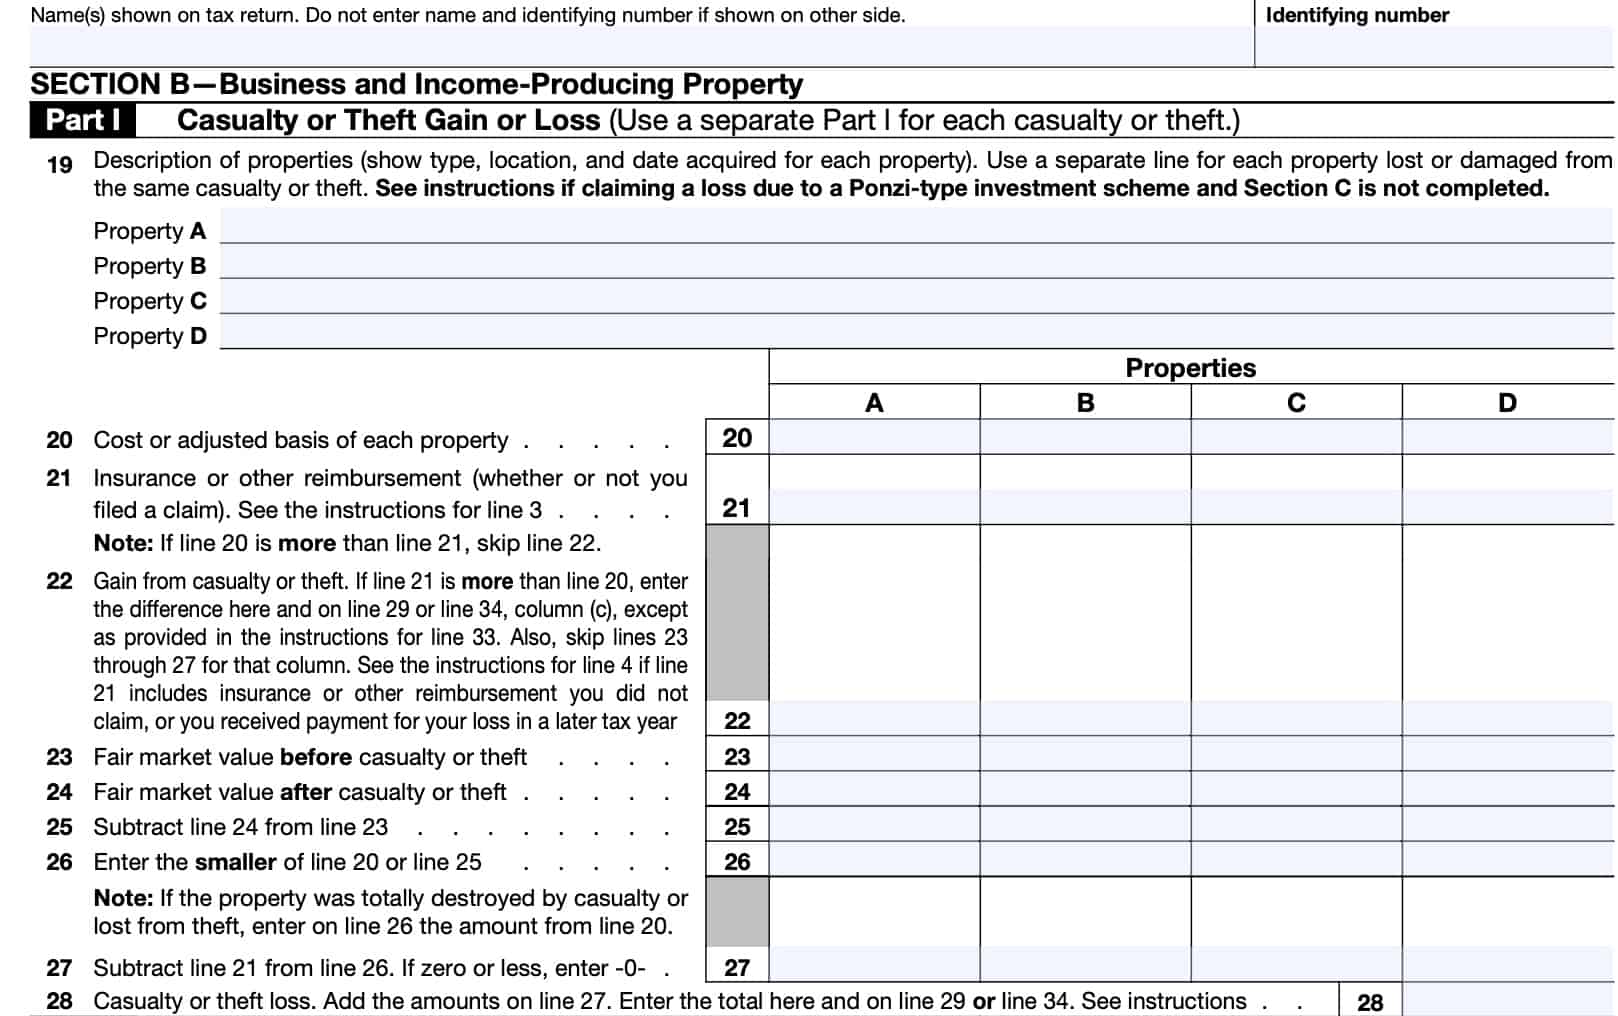 irs form 4684, casualty and thefts, section b-business & income-producing property, part i: casualty or theft gain or loss